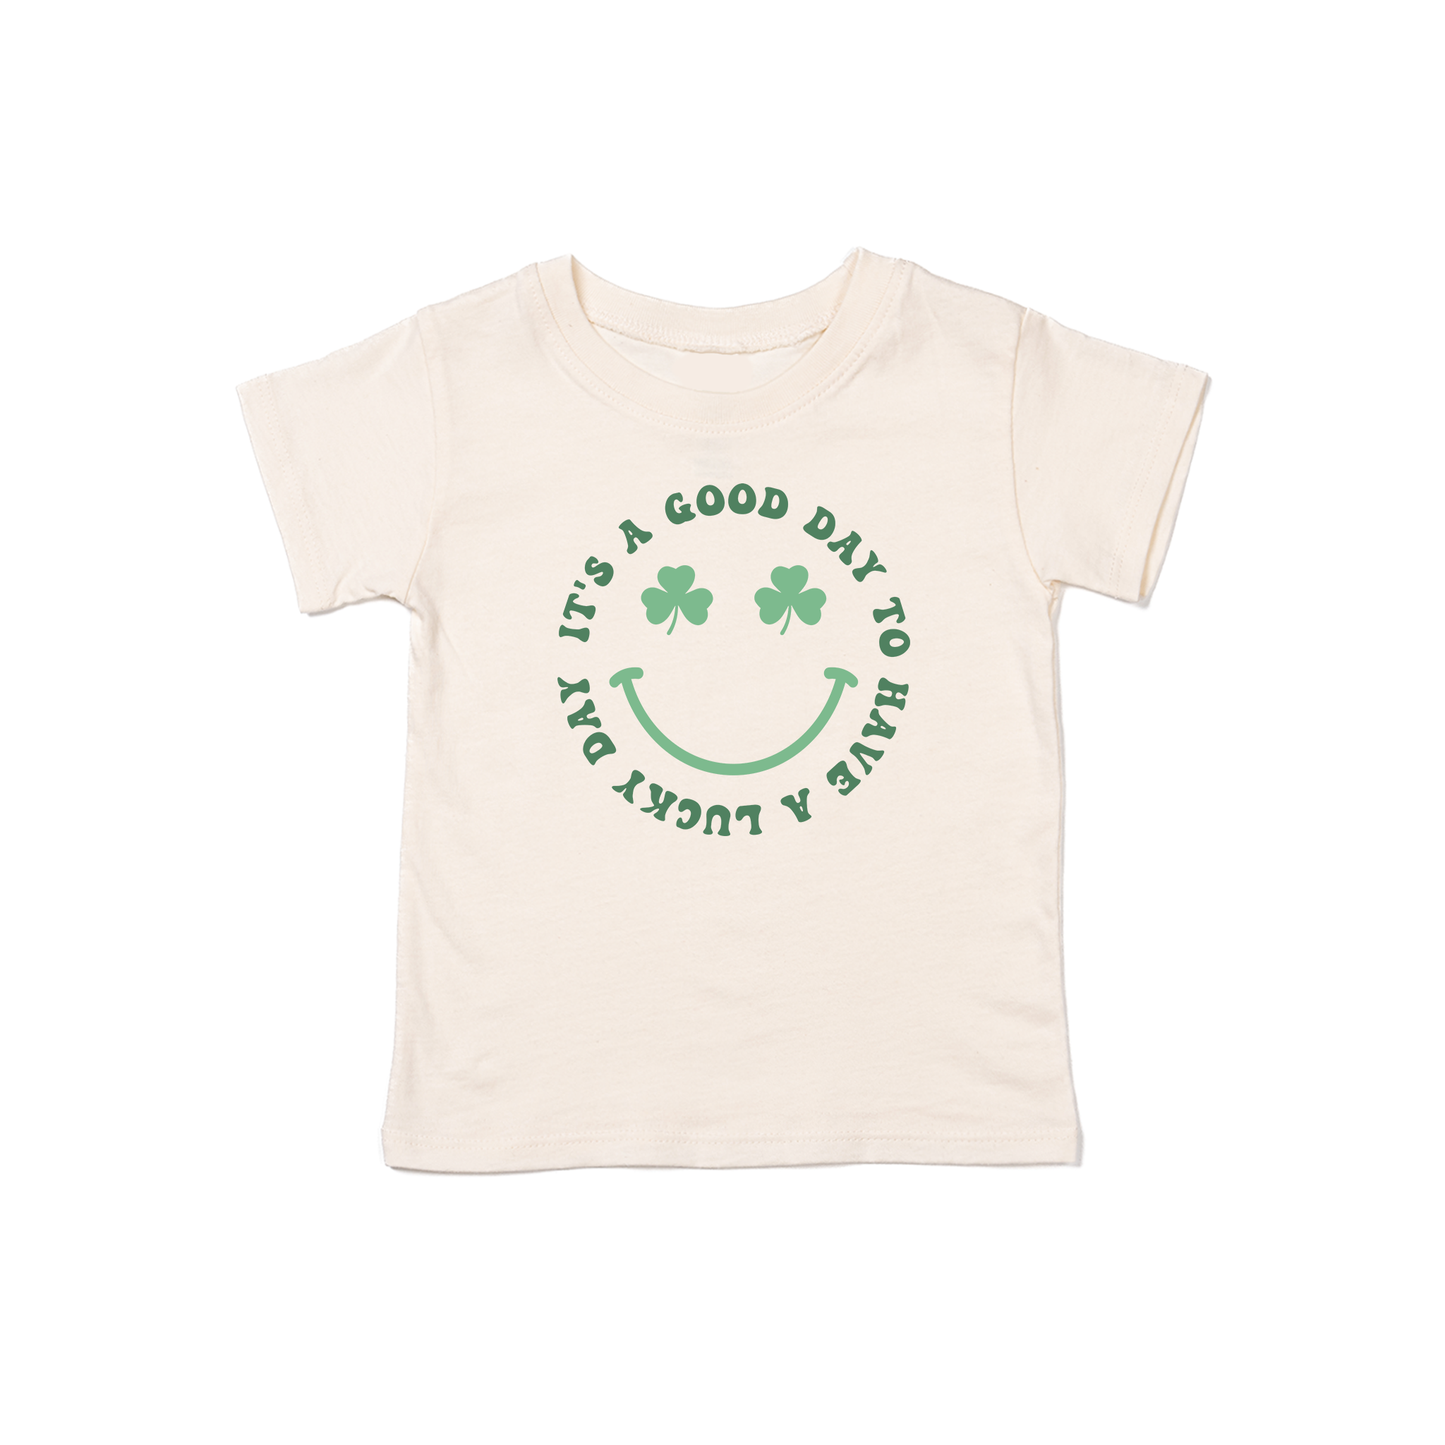 It's a good day to have a Lucky day (St. Patrick's) - Kids Tee (Natural)